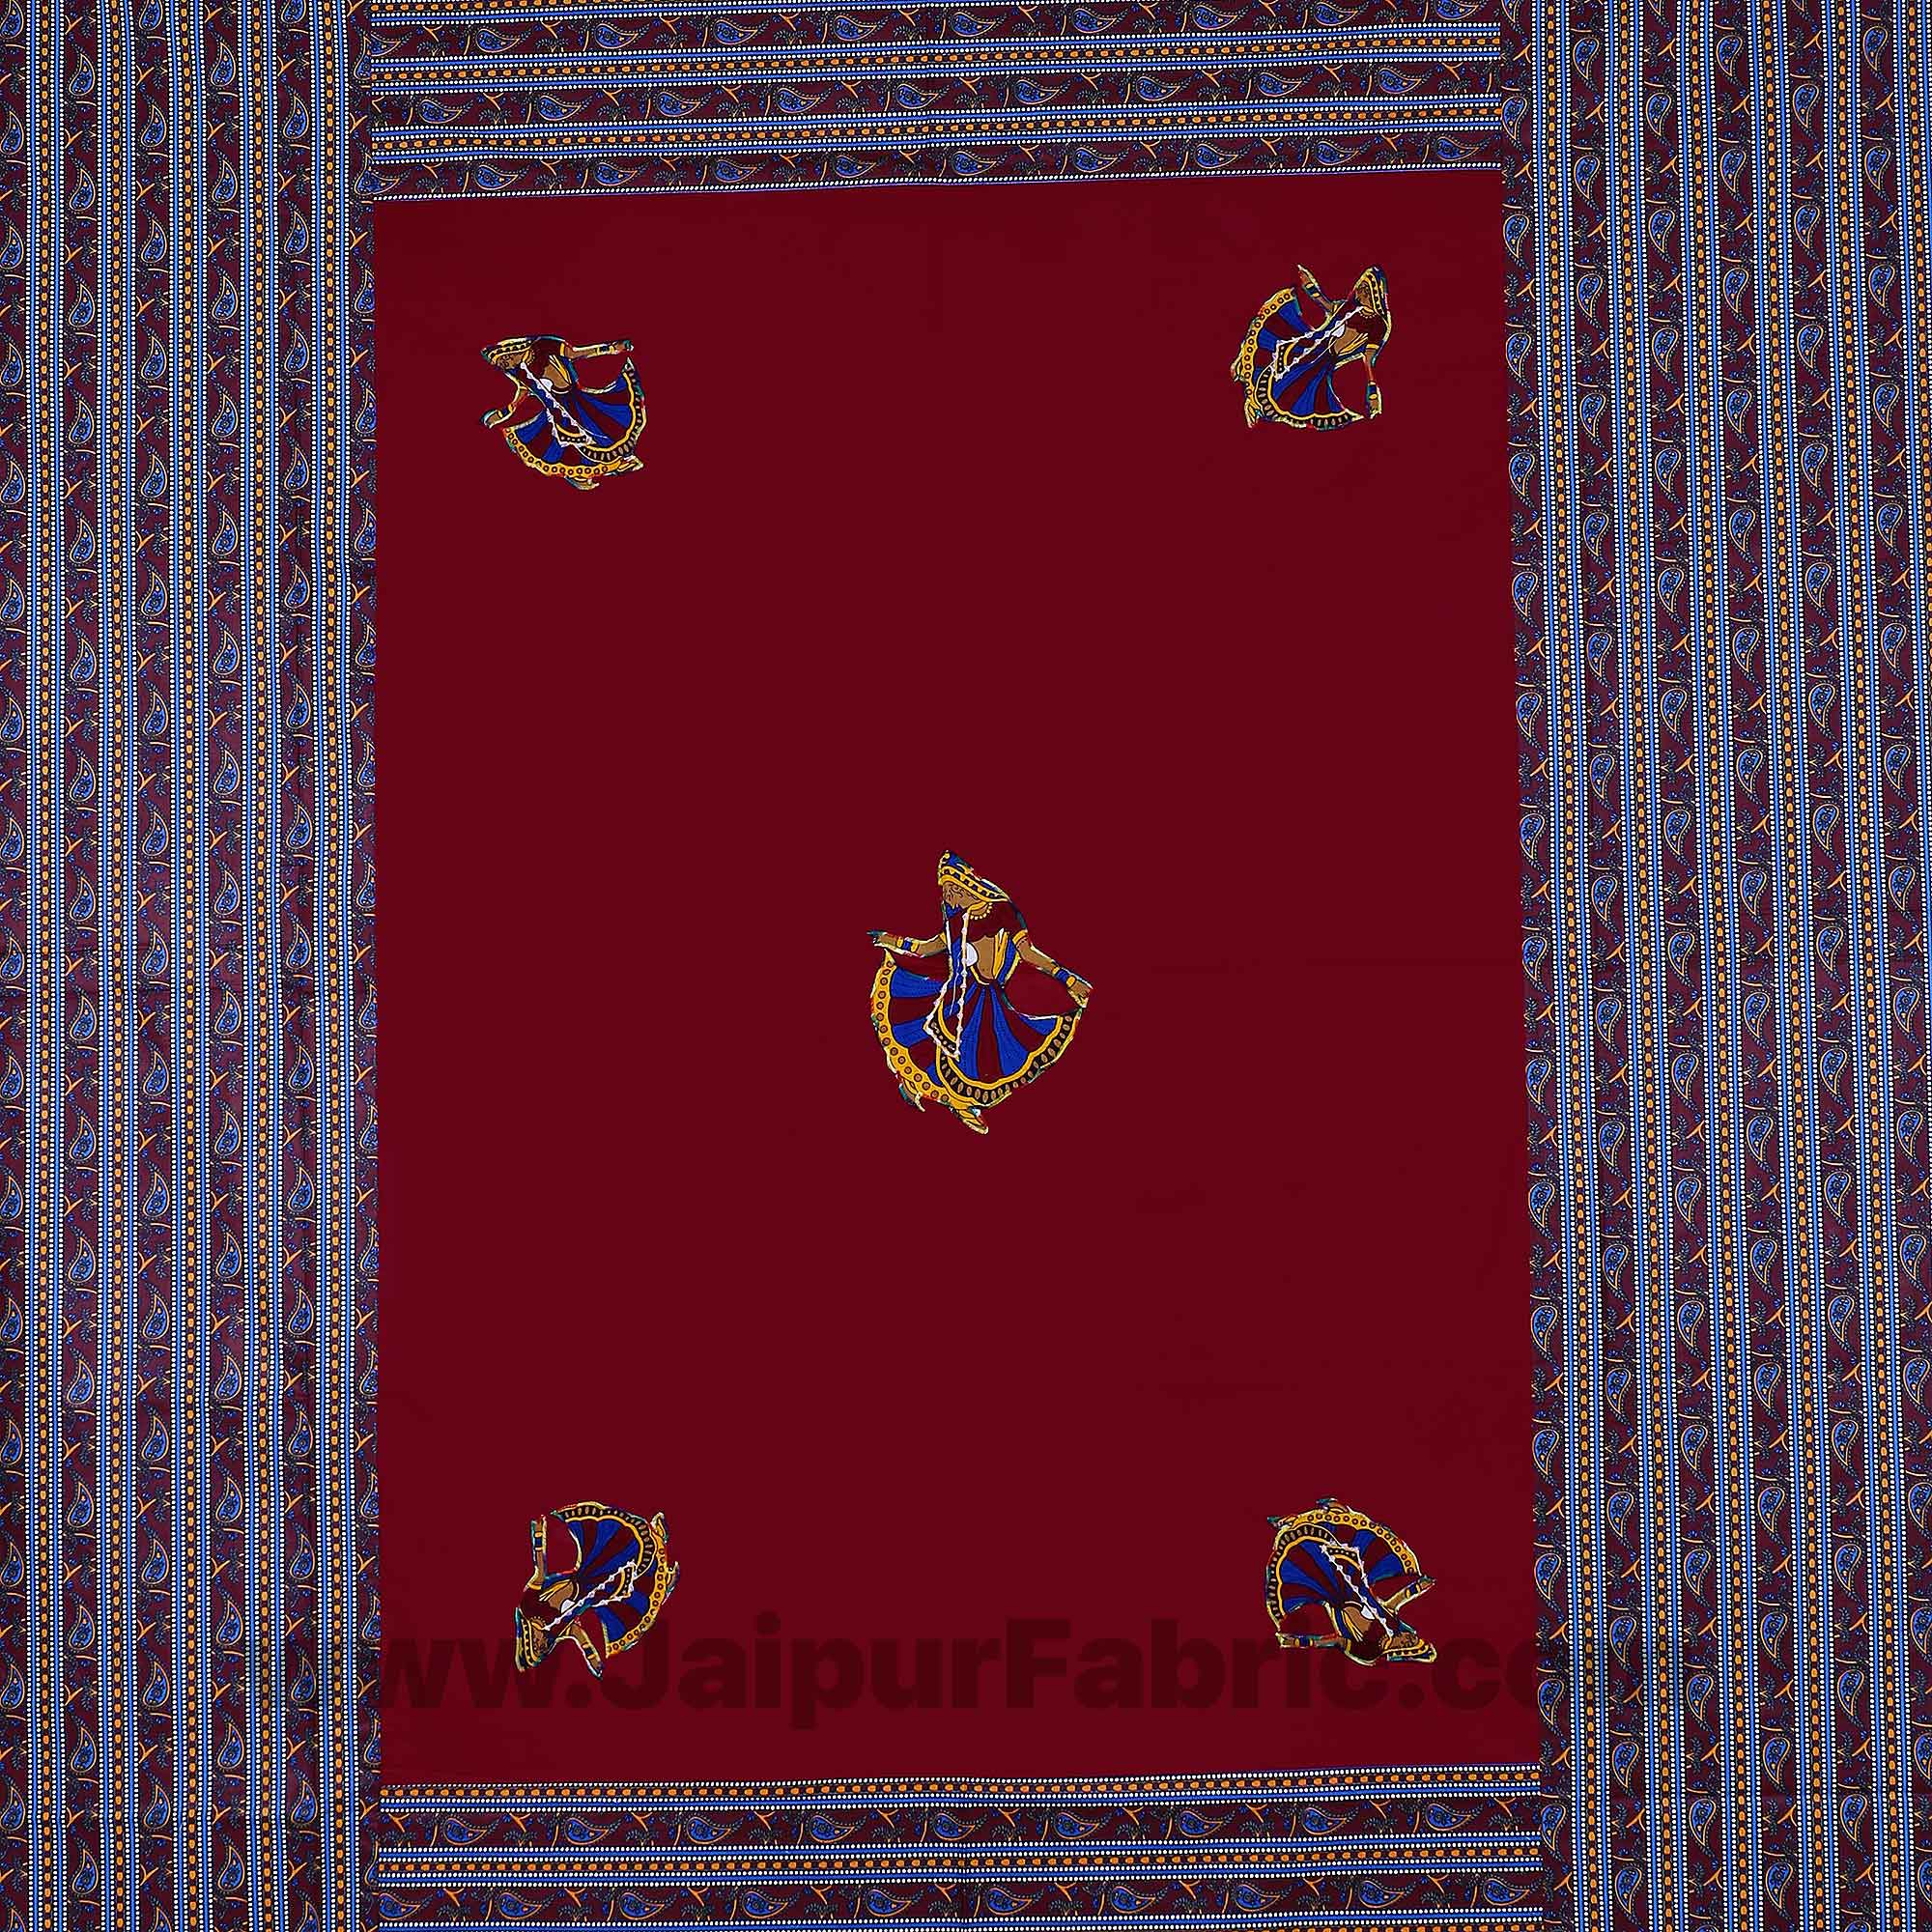 Applique Maroon Gujri Jaipuri  Hand Made Embroidery Patch Work Double Bedsheet